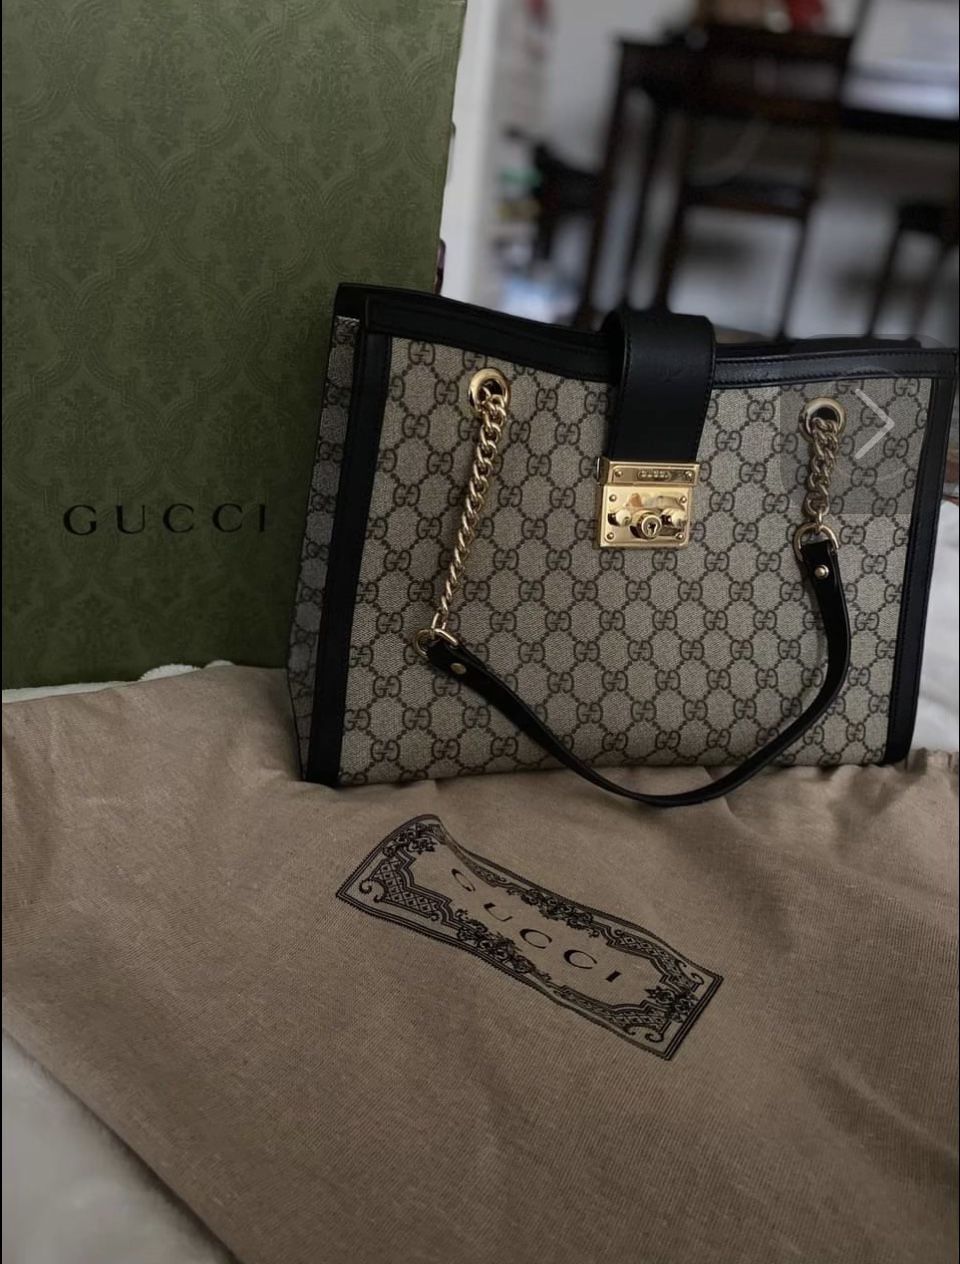 Gucci Bag Never Used!